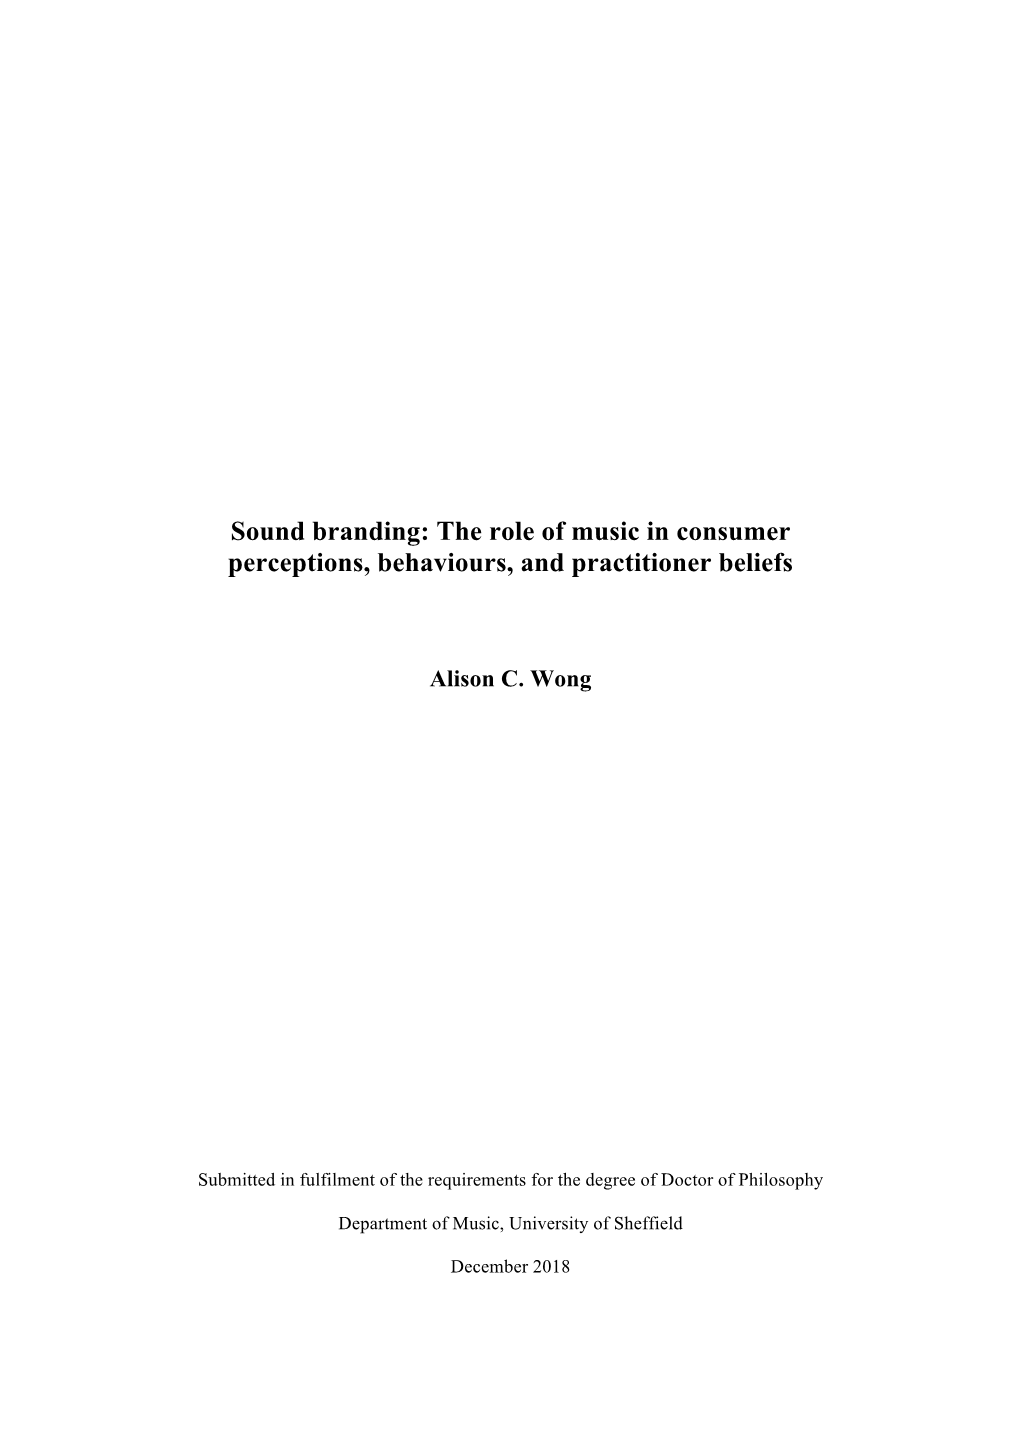 Sound Branding: the Role of Music in Consumer Perceptions, Behaviours, and Practitioner Beliefs